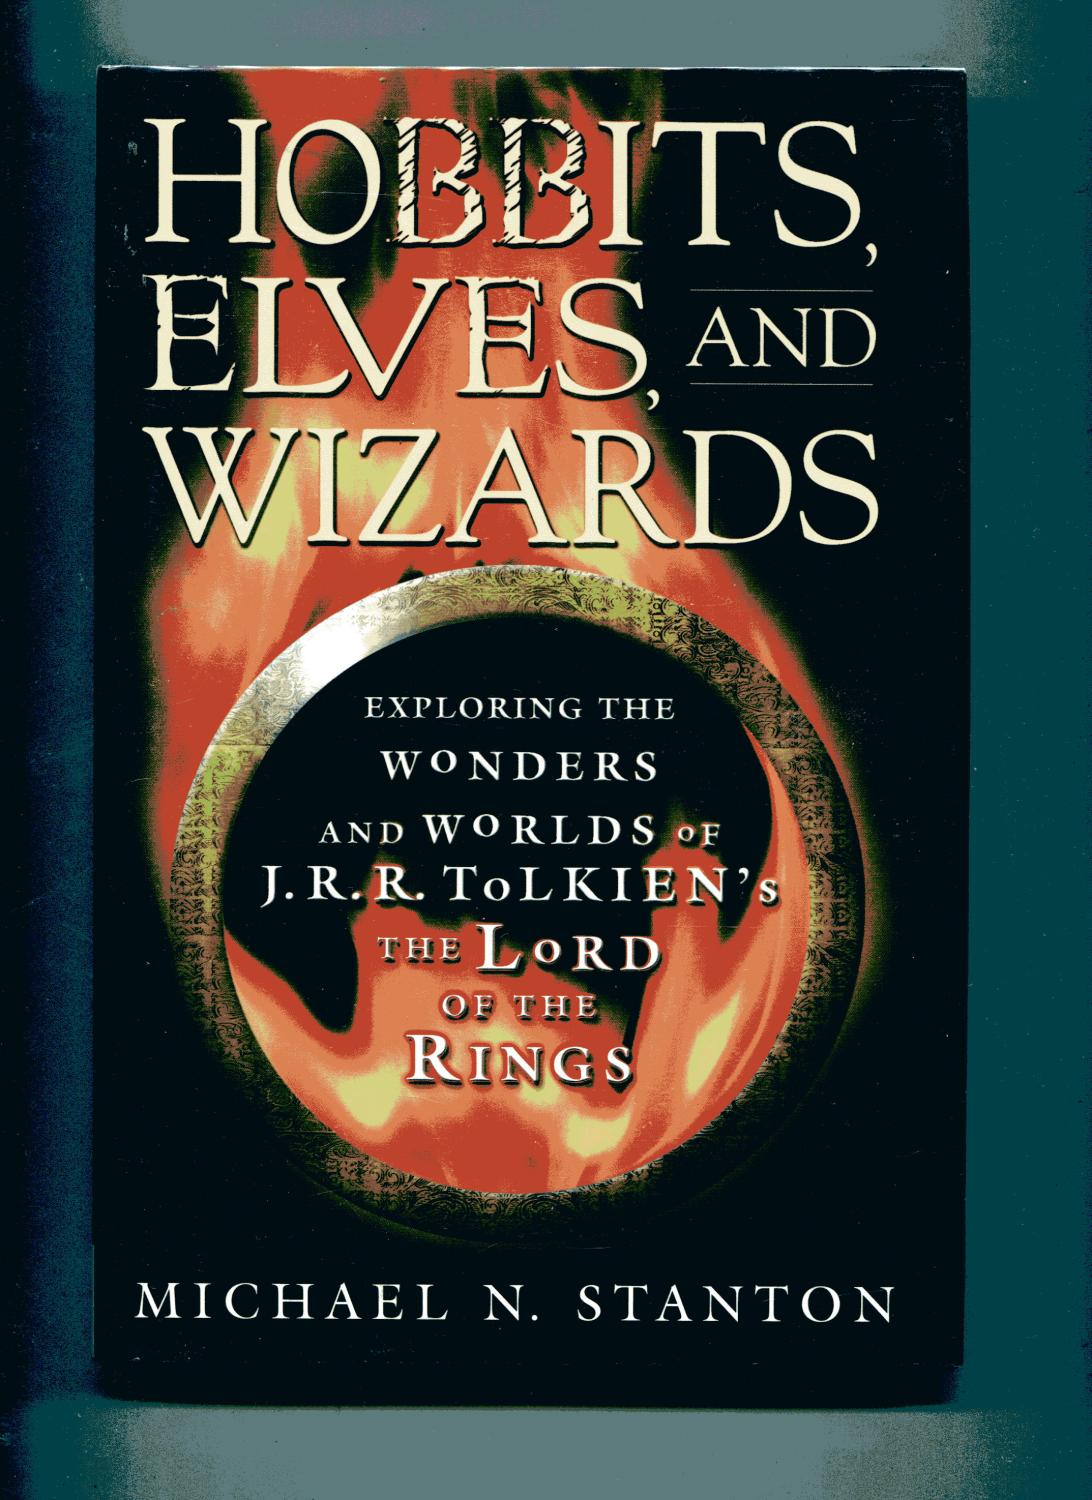 HOBBITS, ELVES, AND WIZARDS: Exploring the Wonders and Worlds of J R R Tolkien's The Lord of the Rings